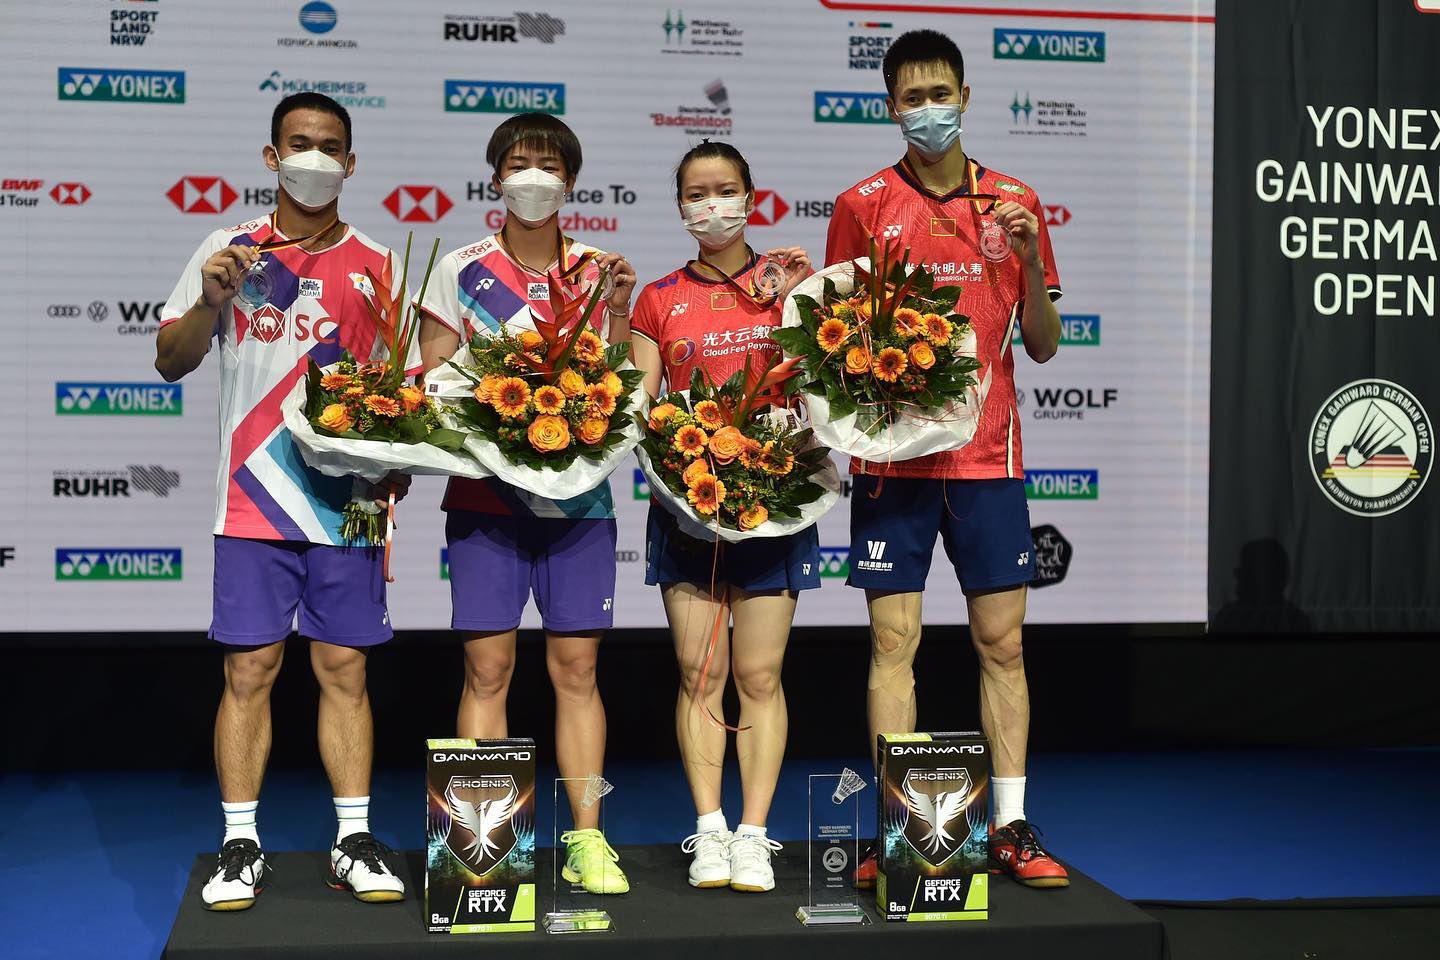 Cant find a graphics card? Do what this Malaysian pair did and win the German Open